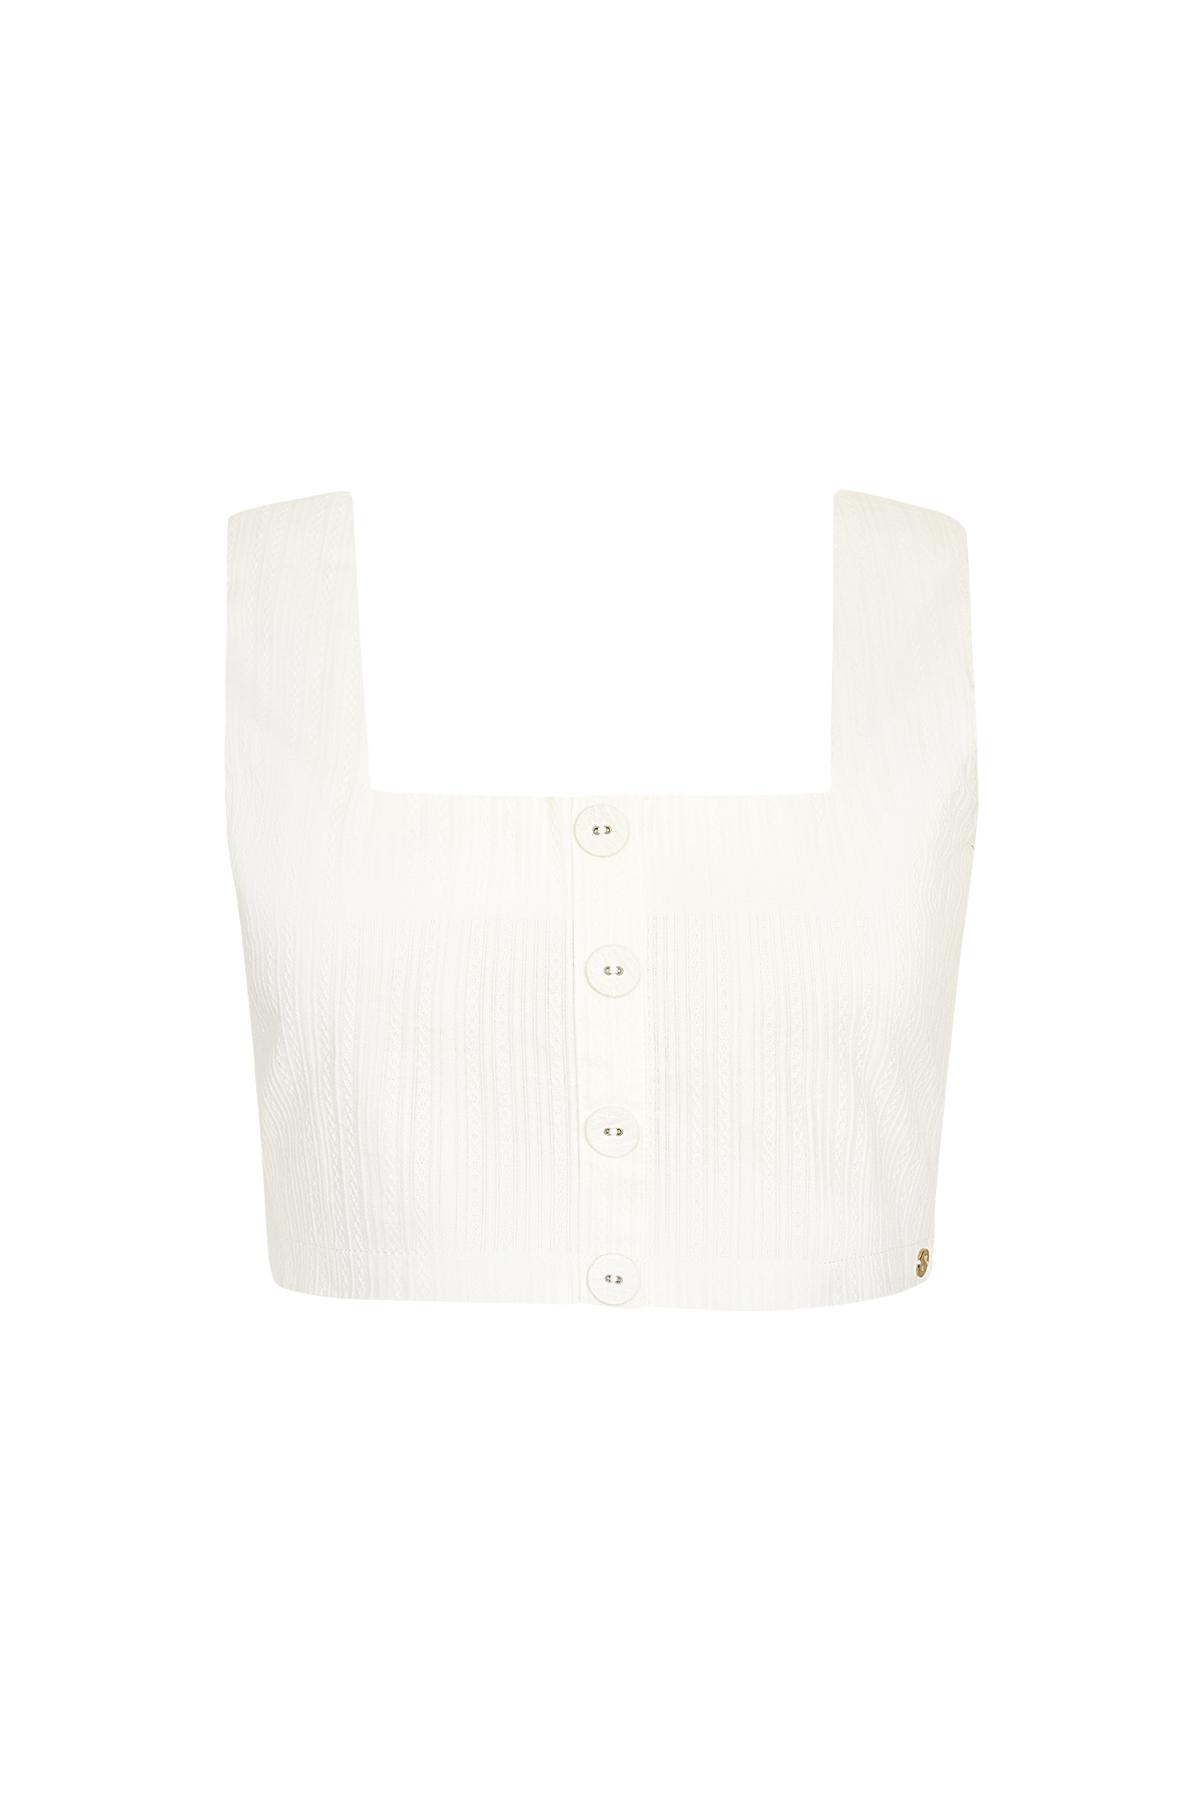 Crop top knot detail - white S